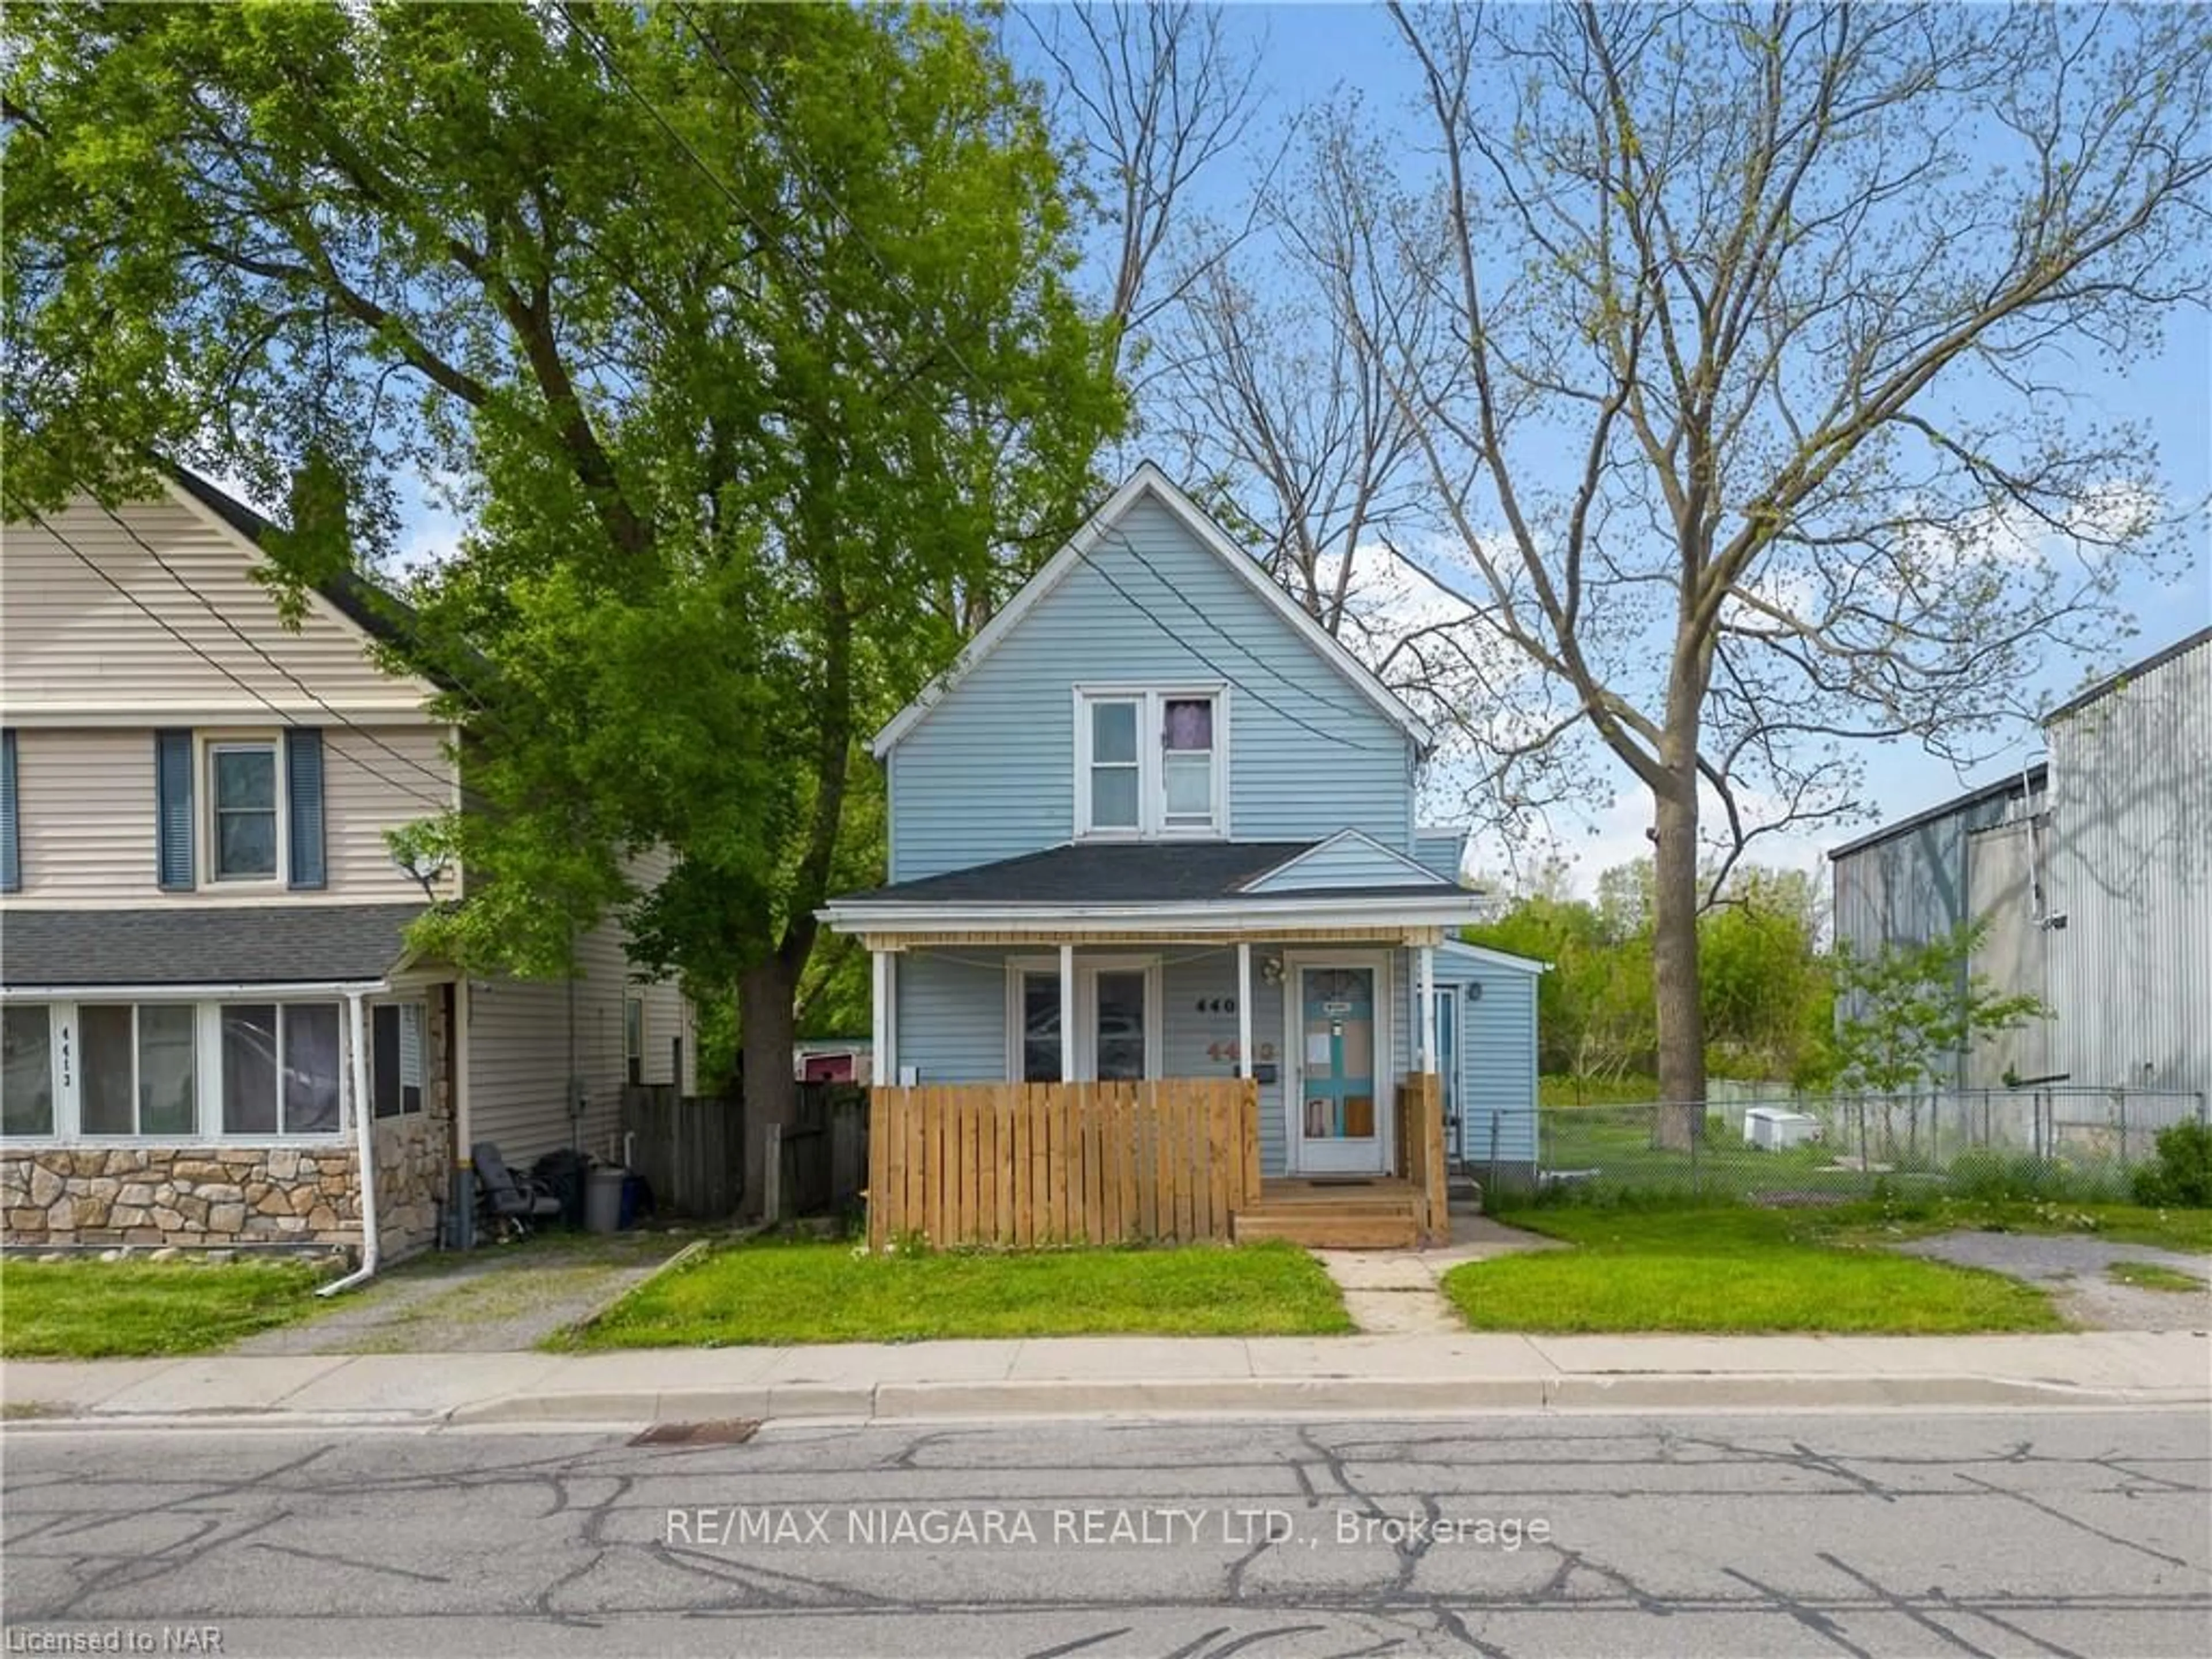 Frontside or backside of a home for 4403 Park St, Niagara Falls Ontario L2E 2P4